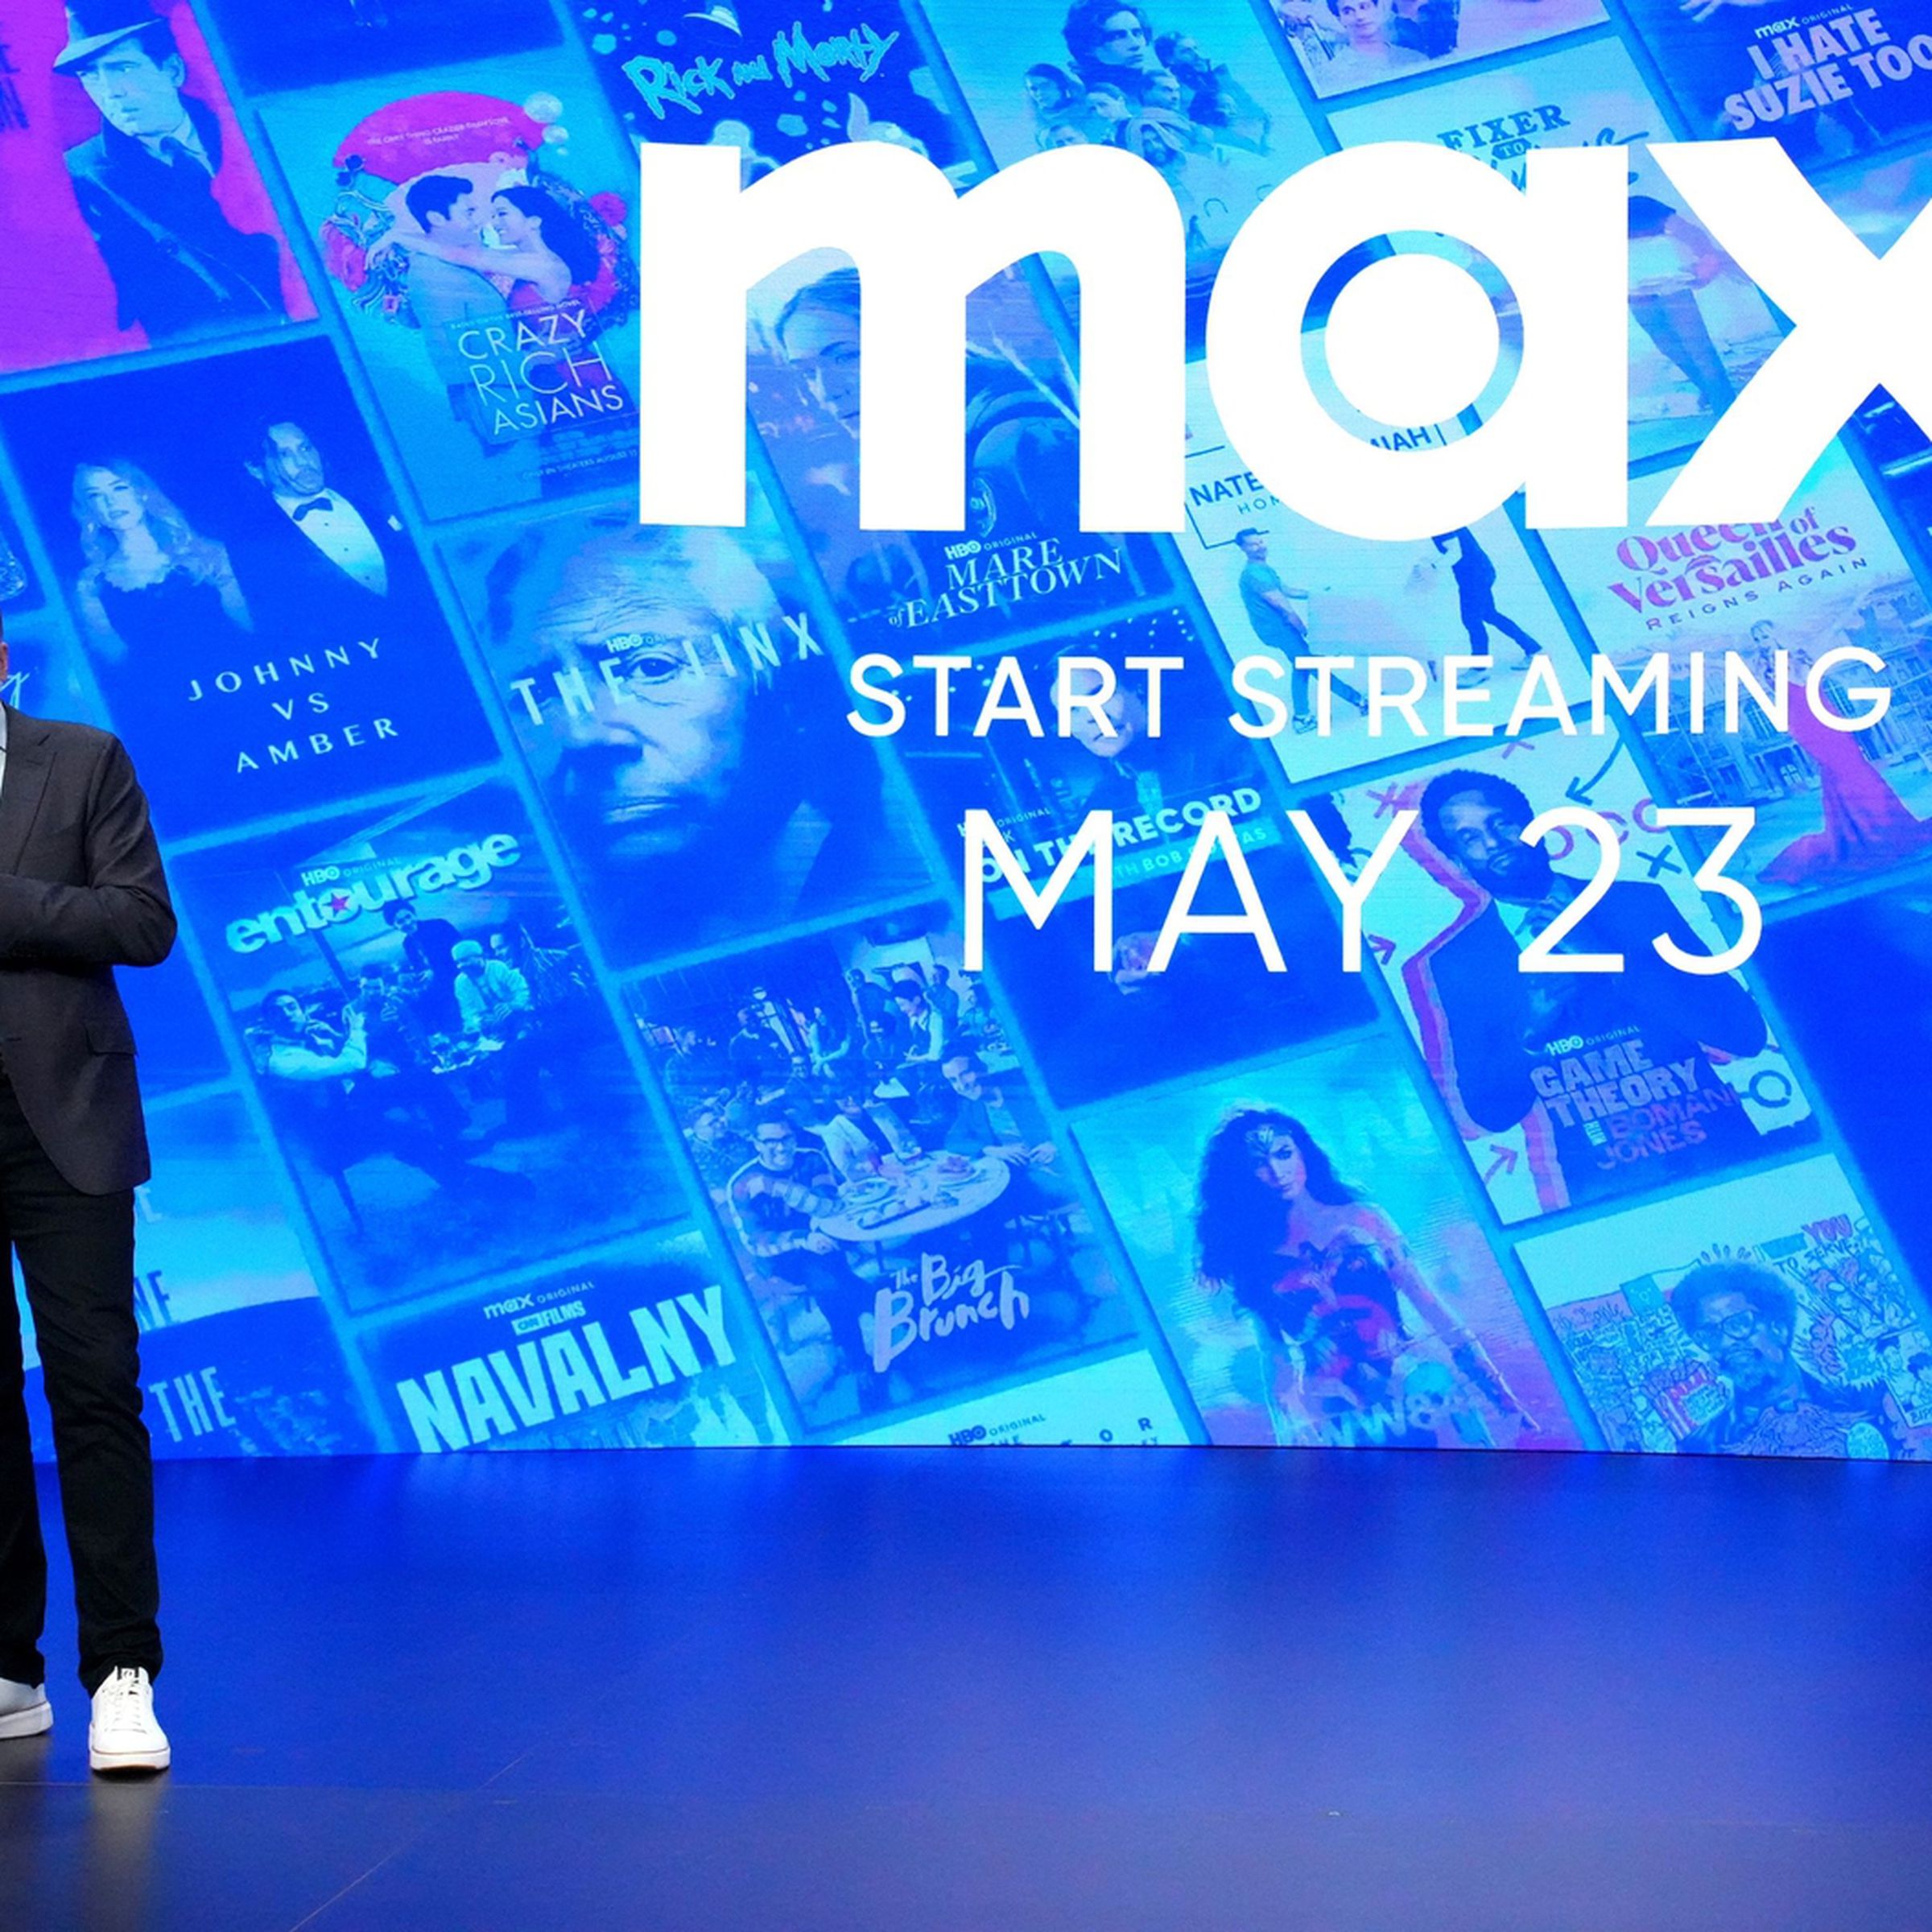 A picture of chair and CEO of HBO and Max content, Casey Bloys, standing in front of the Max logo.